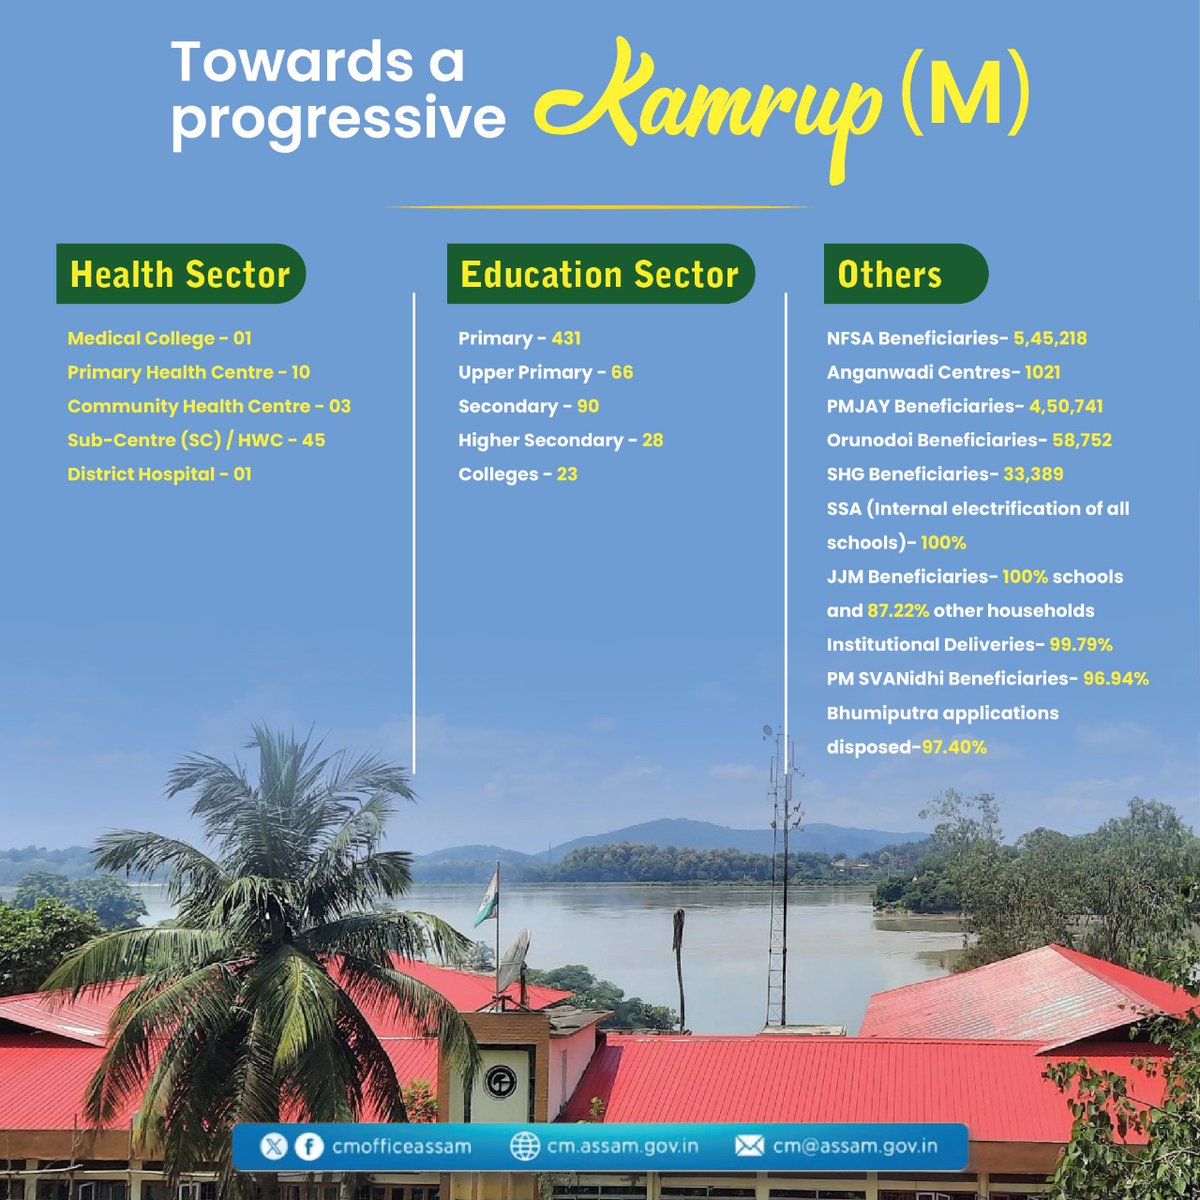 Under the dynamic and progressive policies of the Assam Government, Kamrup (M) is advancing steadily in its developmental pursuits. Here's a snapshot of the district's ongoing progress.